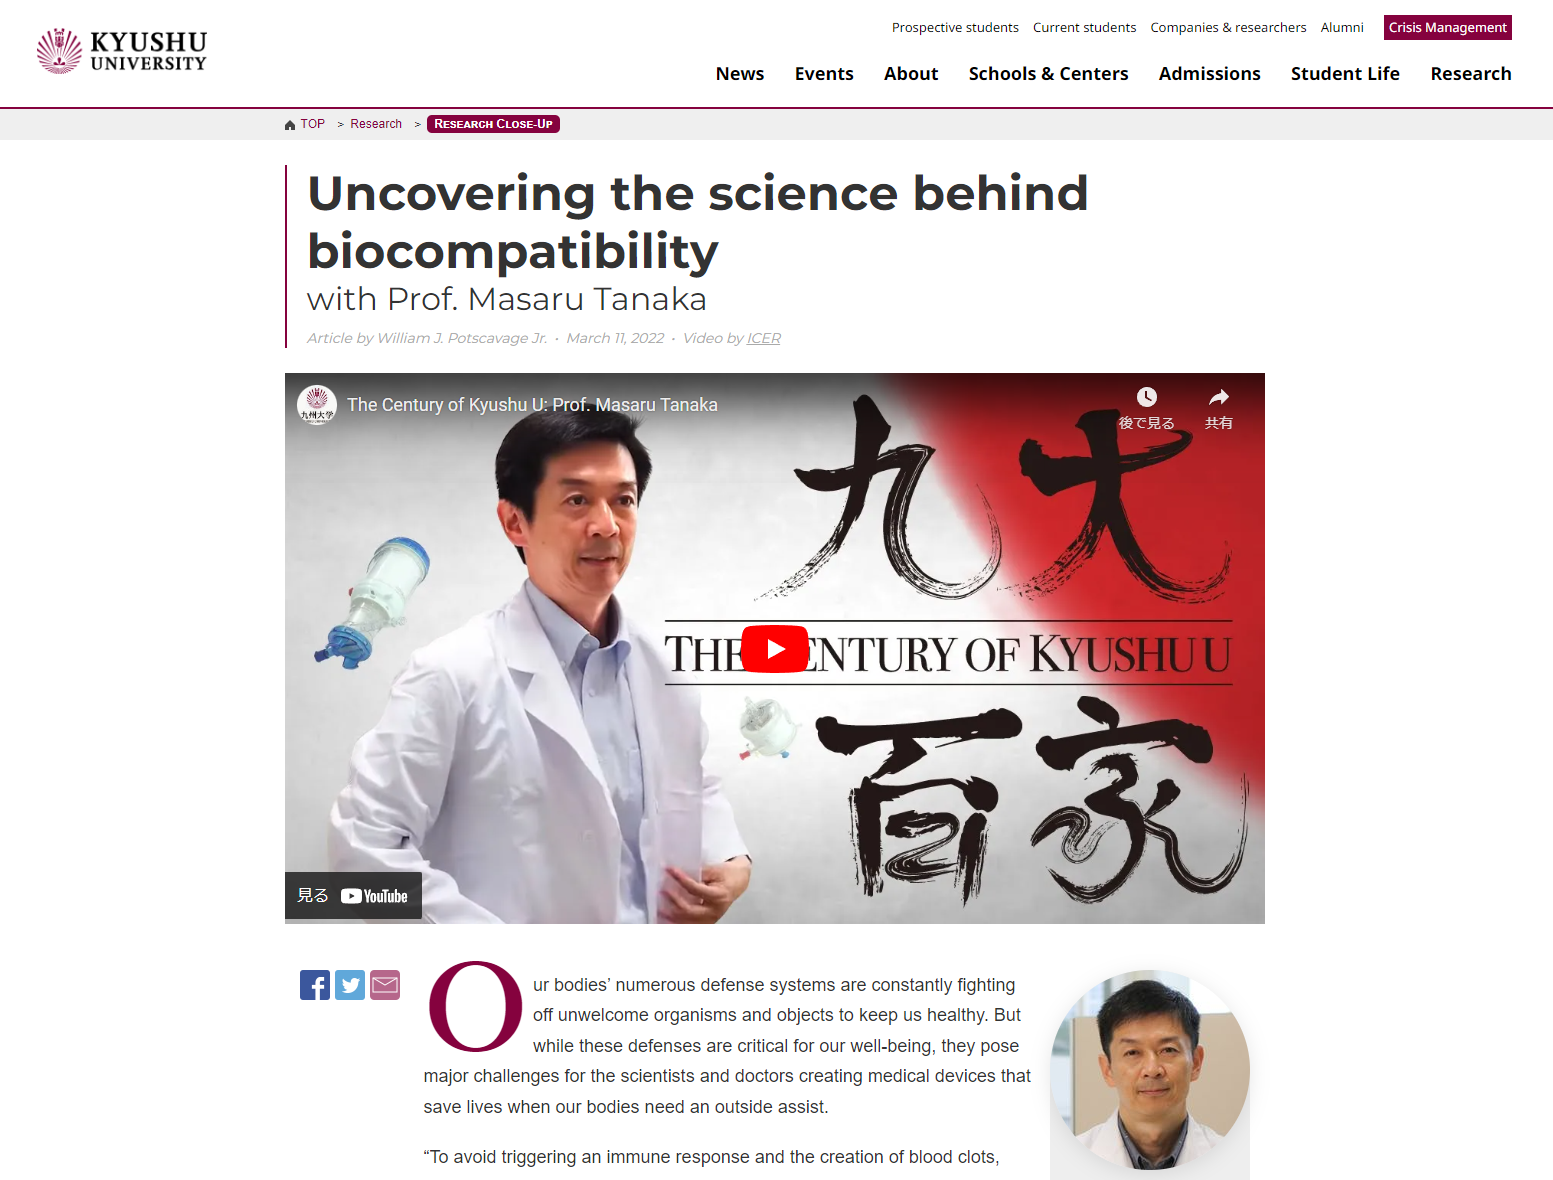 Cover Image for Prof. Masaru Tanaka was introduced on the university's website.